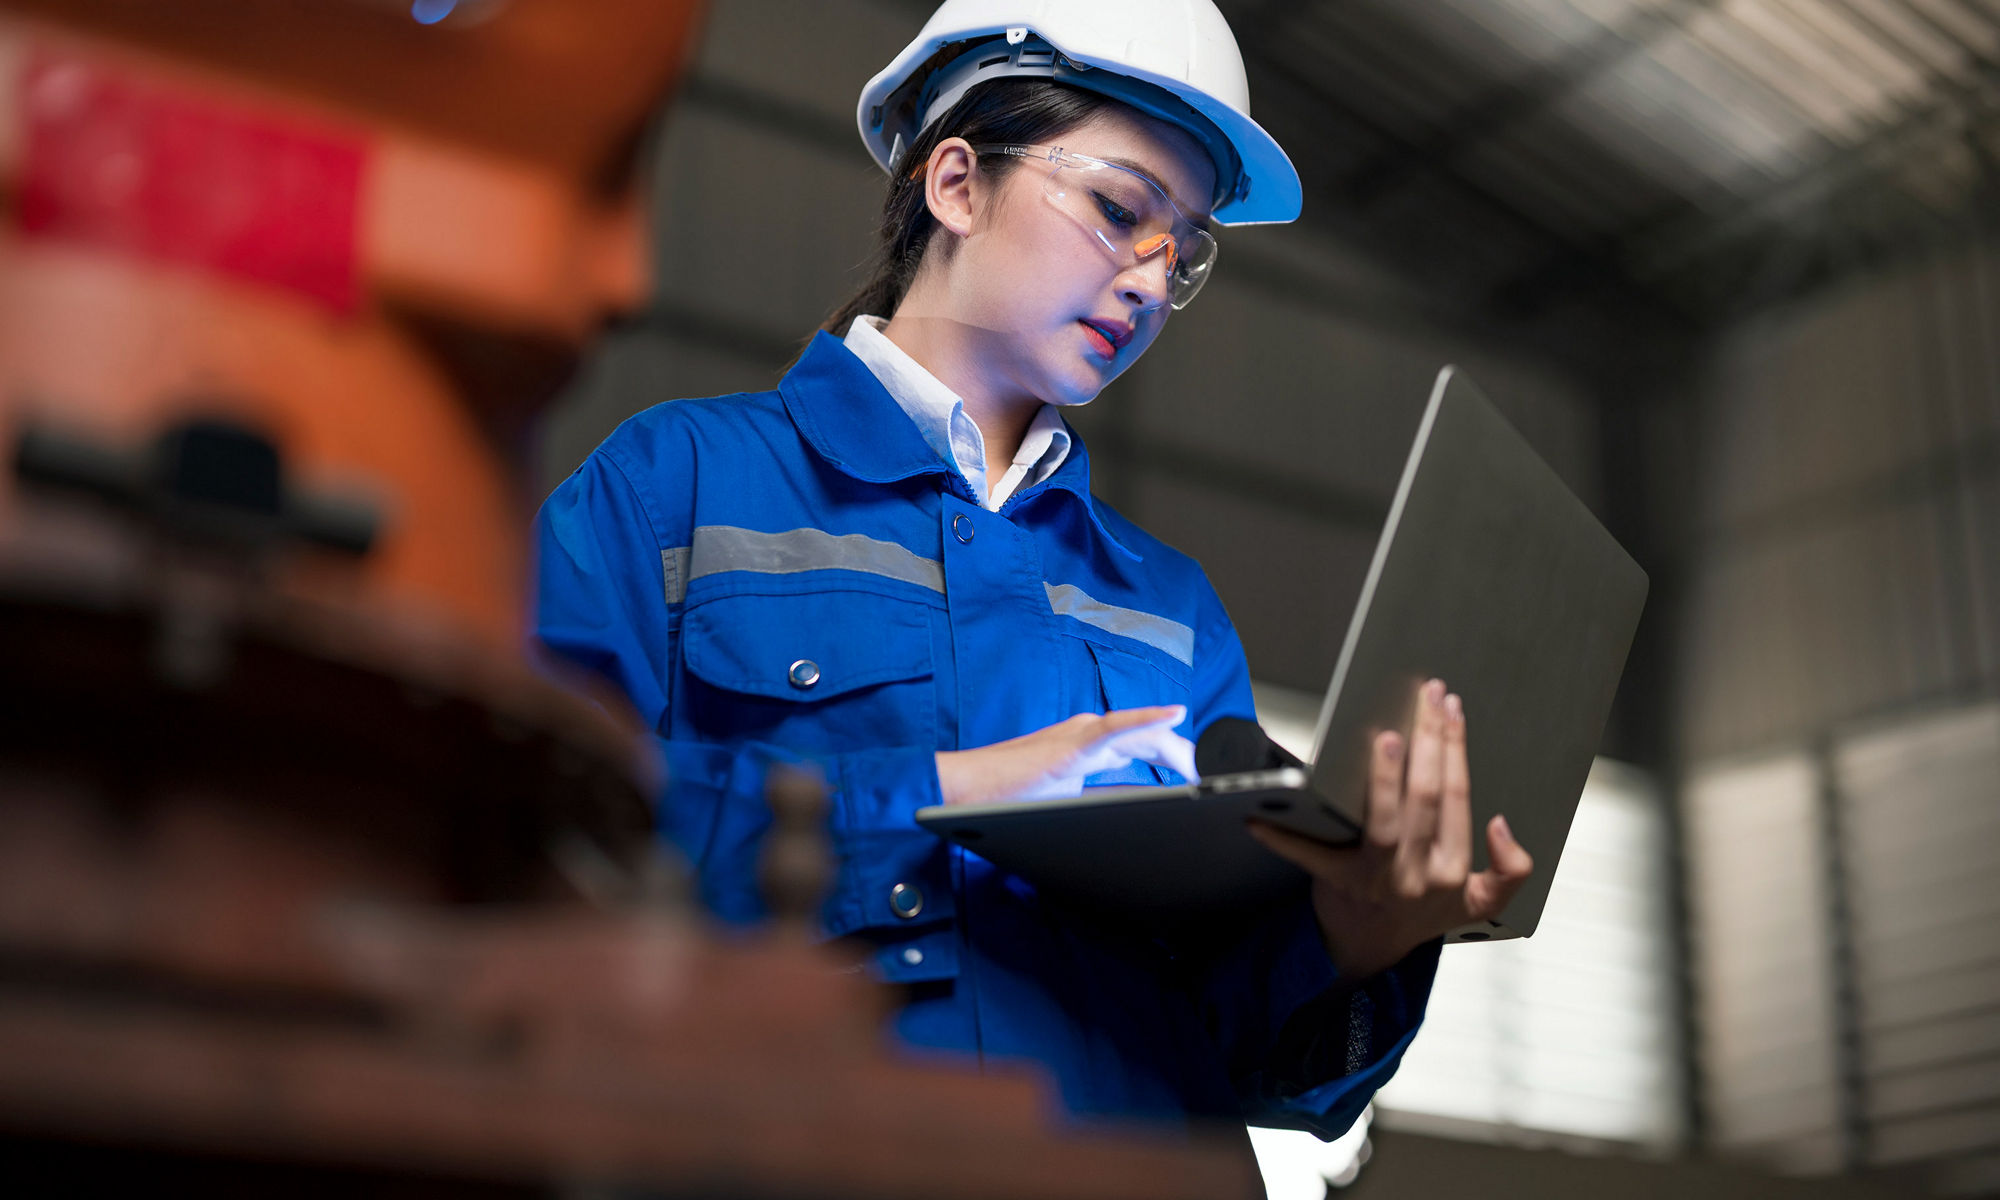 Standing woman wearing a hard hat and blue coveralls working on a laptop